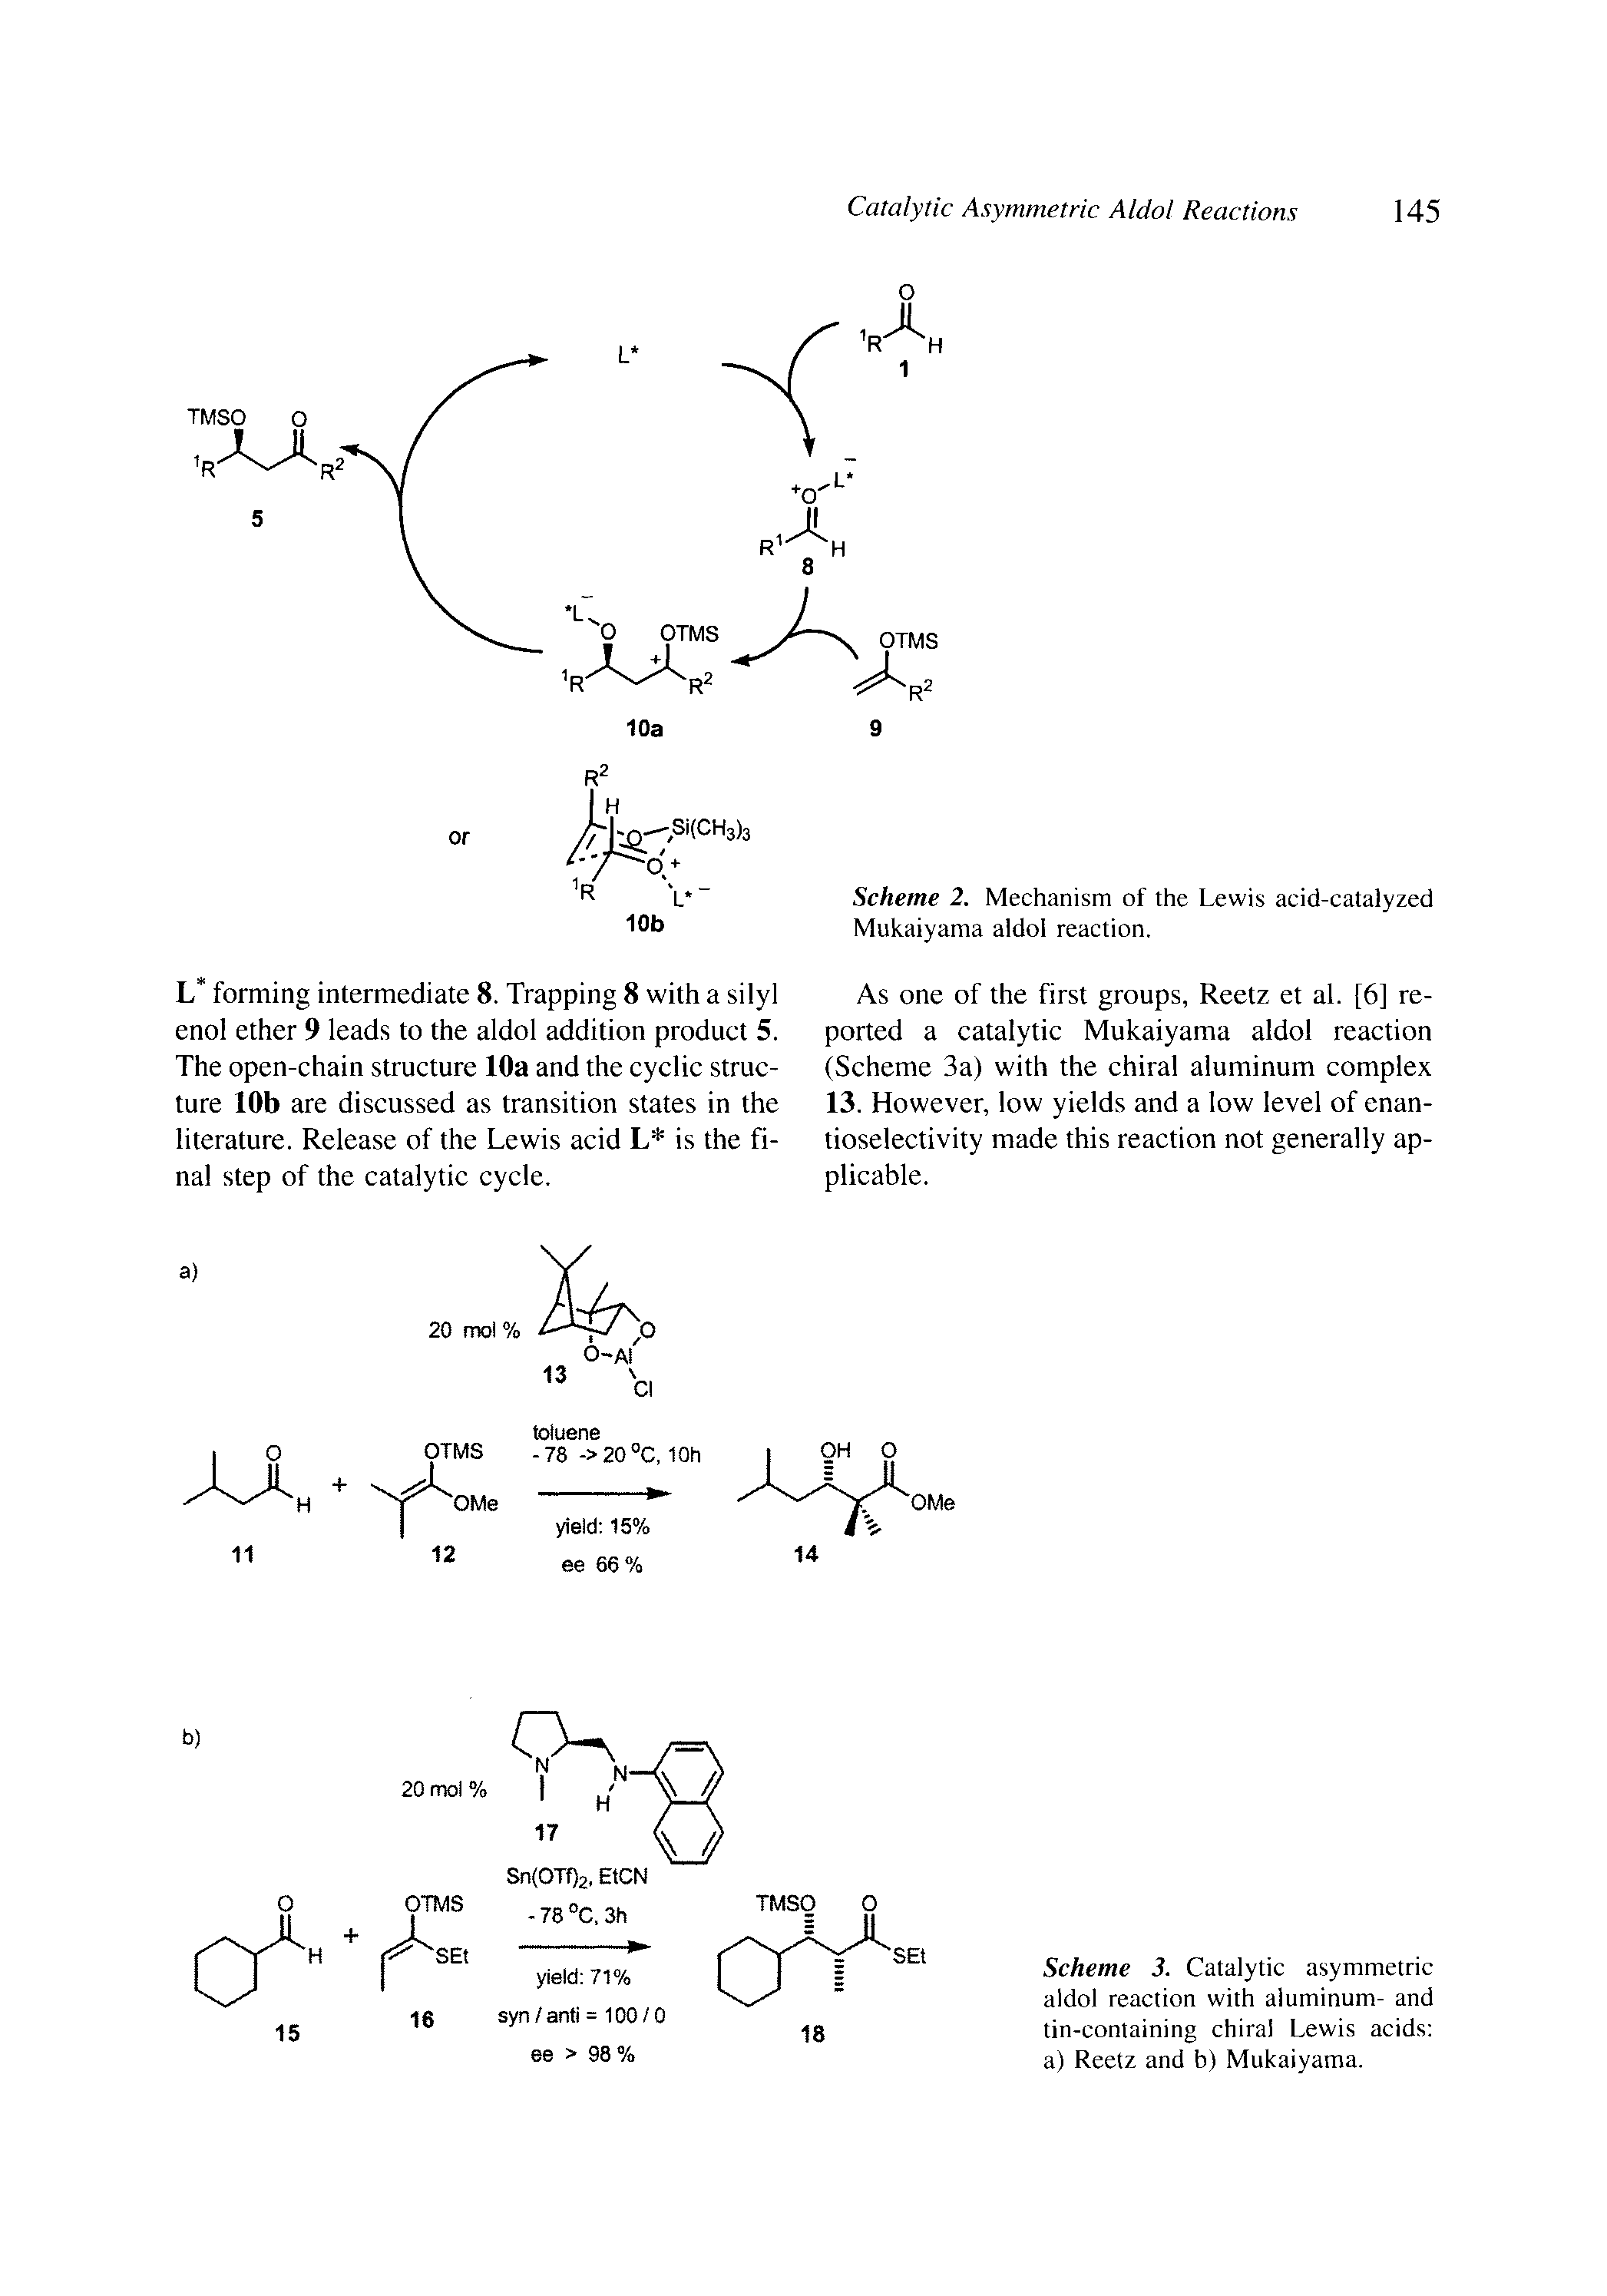 Scheme 3. Catalytic asymmetric aldol reaction with aluminum- and tin-containing chiral Lewis acids a) Reetz and b) Mukaiyama.